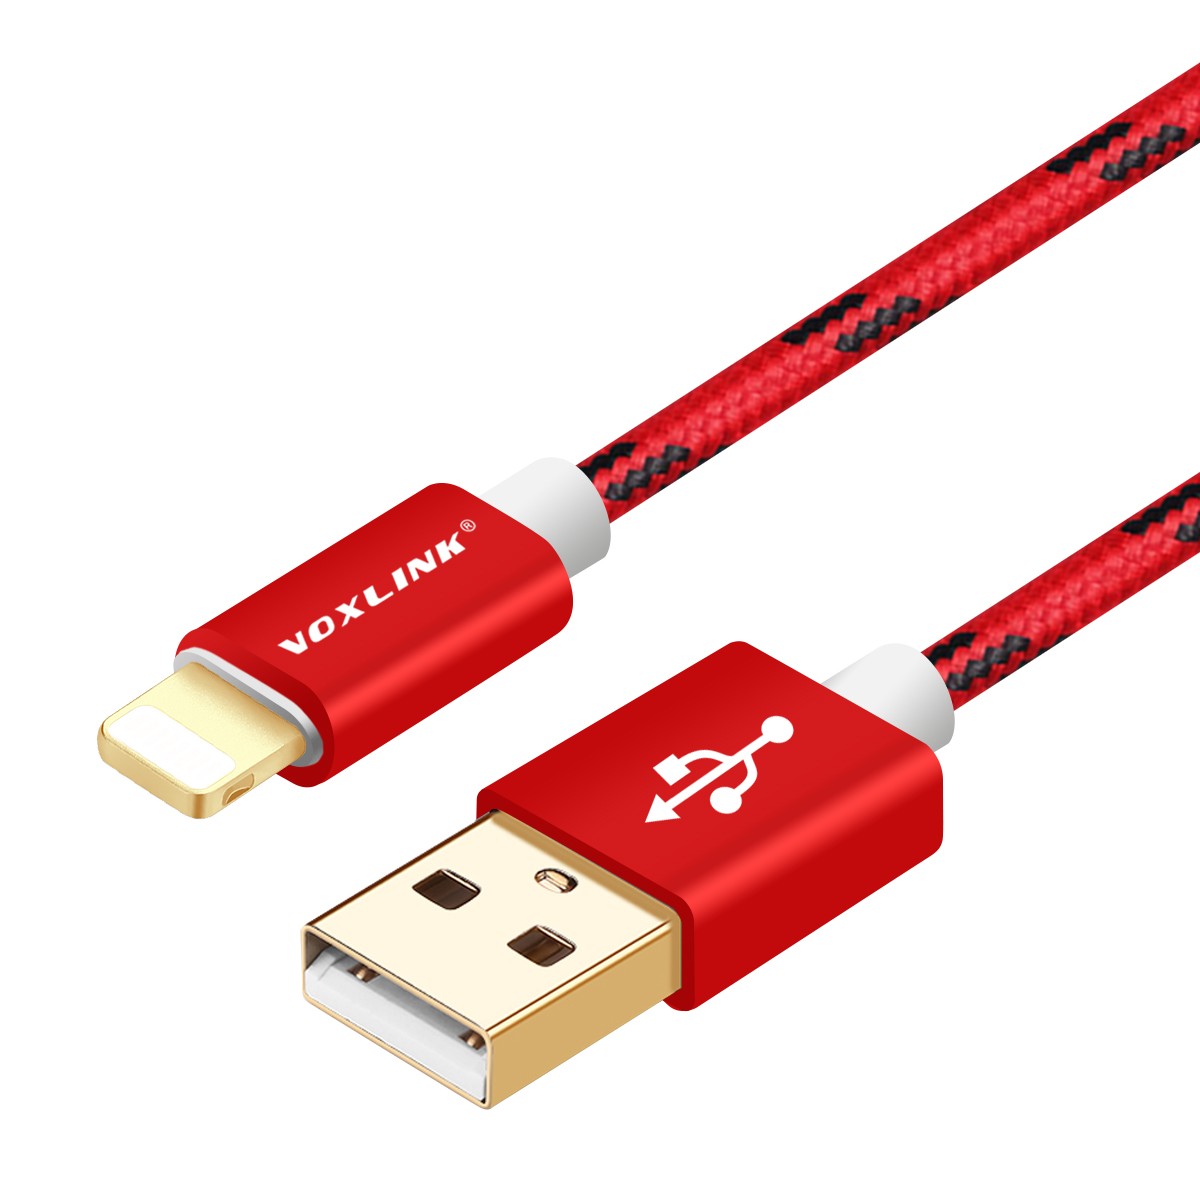 VOXLINK 8pin to USB Cable Fast Charger Adapter USB Cable For iphone 7 6 6s plus iphone 5s ipad mini Mobile Phone Cables red 0.5m